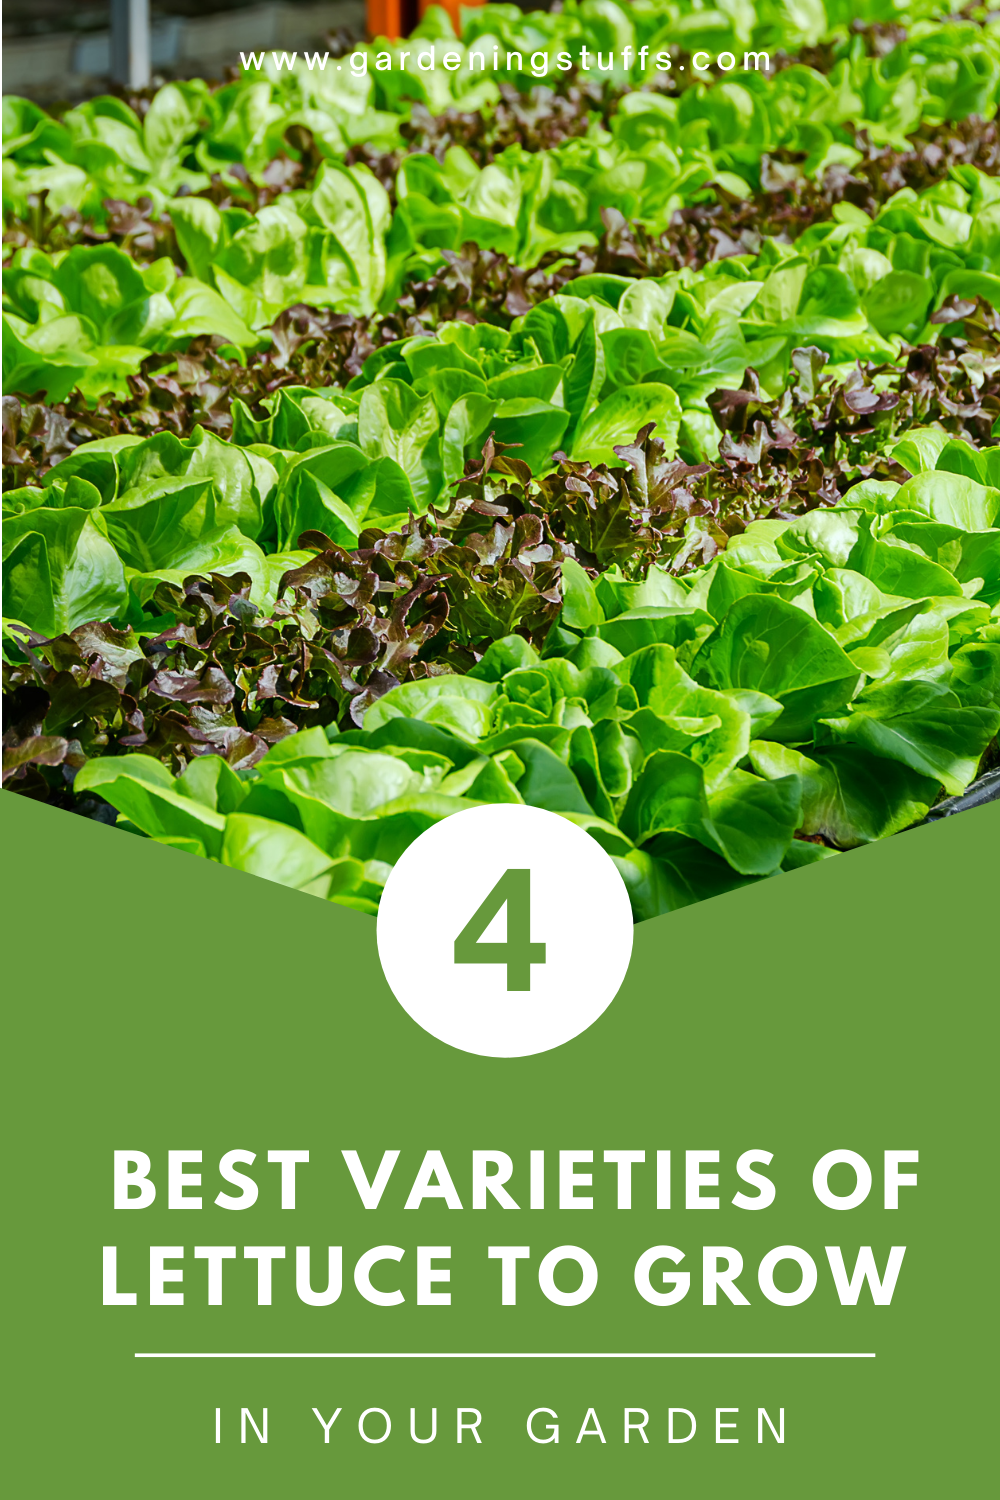 If you’ve ever considered growing your own lettuce to liven up your wraps or salads, you may have found it daunting given all the different types. Luckily, all types of lettuce are easy to grow and make a great starter for a vegetable garden. Read on to learn more about the different types of lettuce and how to grow them.